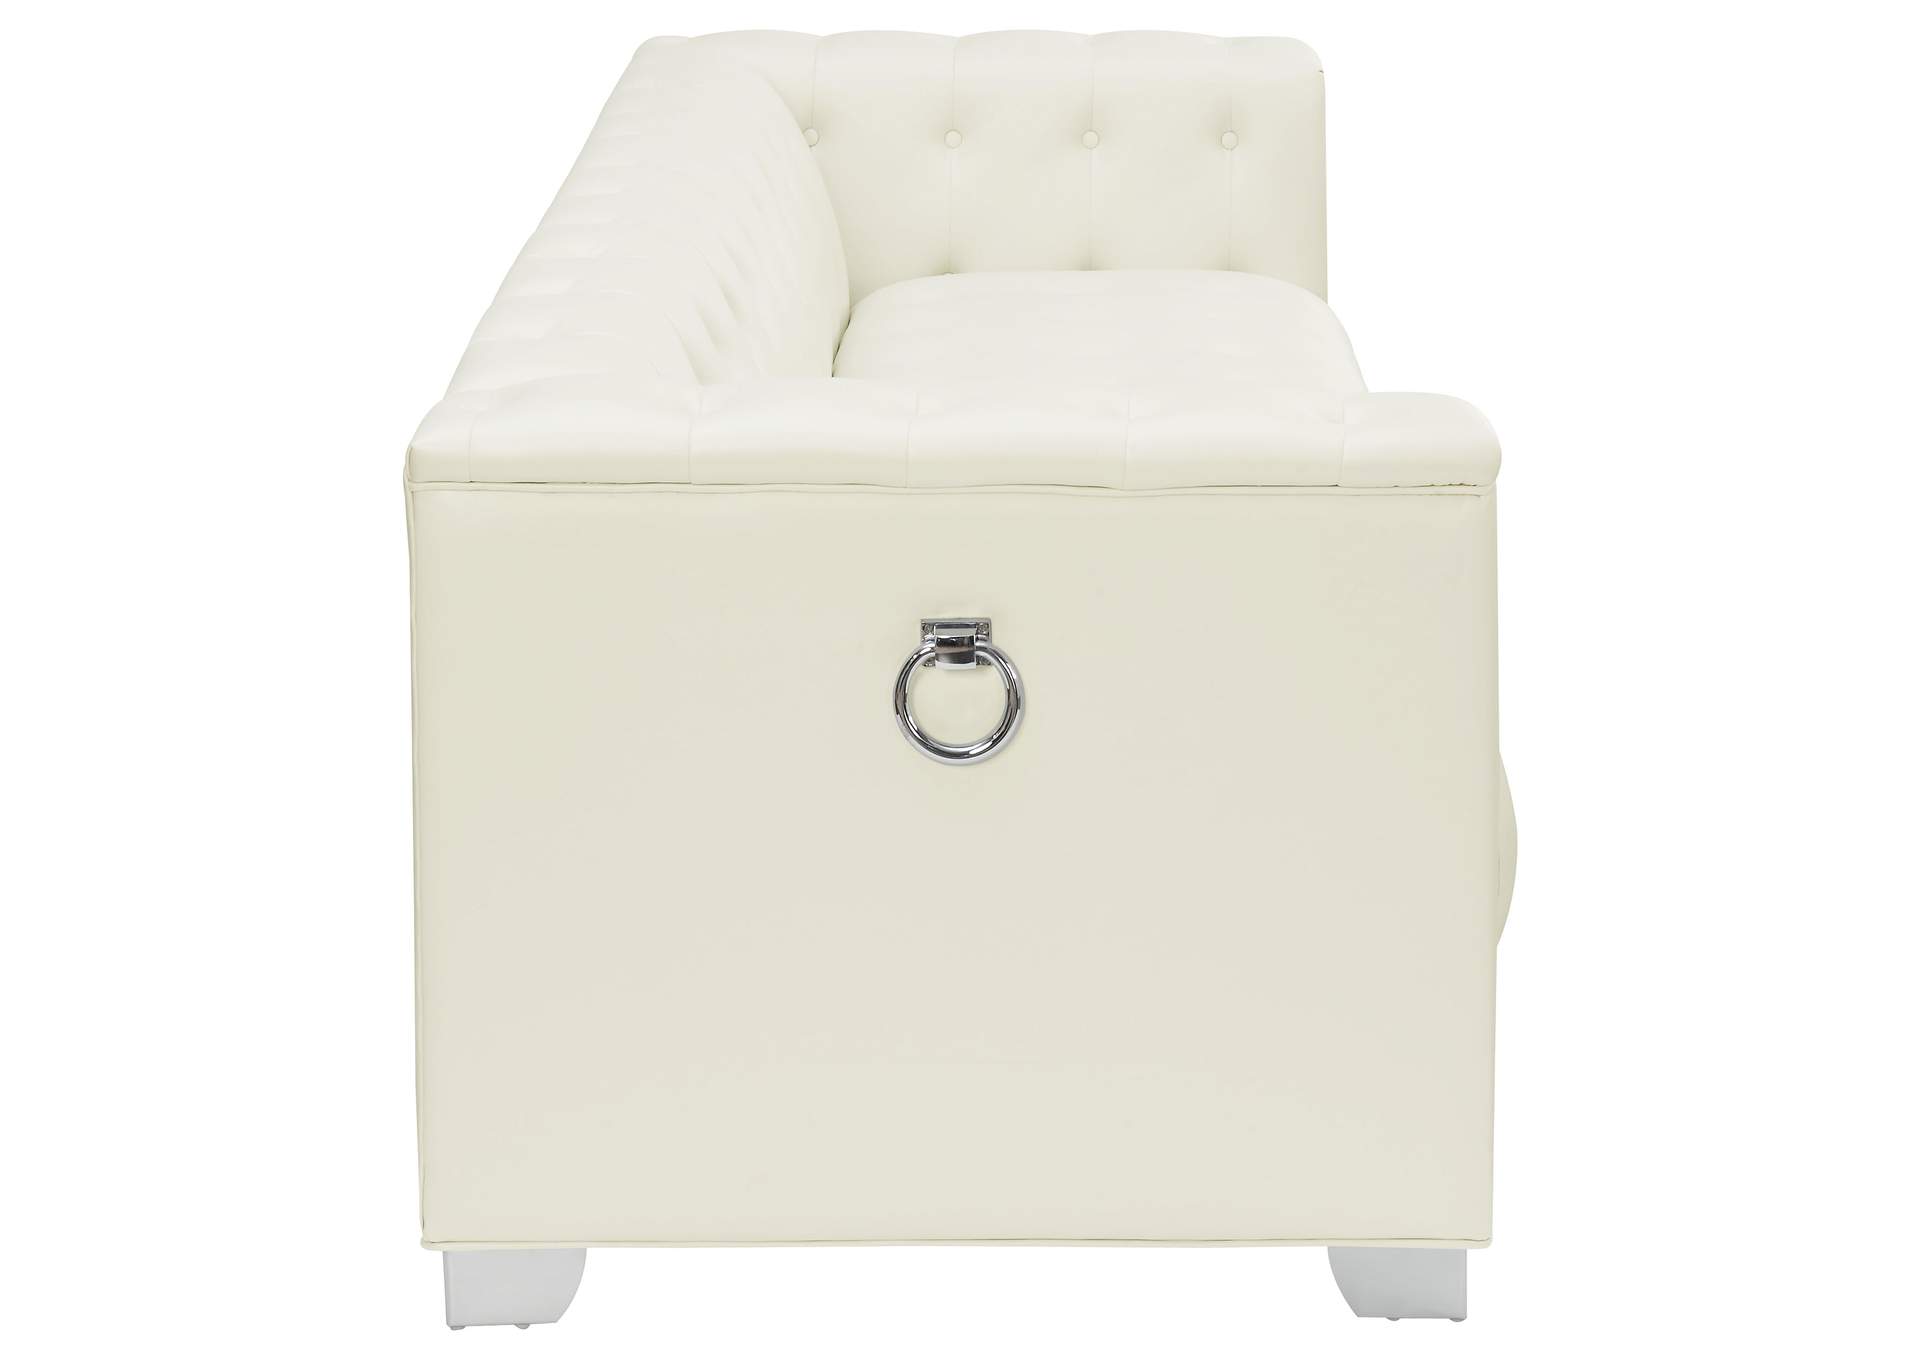 Chaviano Tufted Upholstered Sofa Pearl White,Coaster Furniture